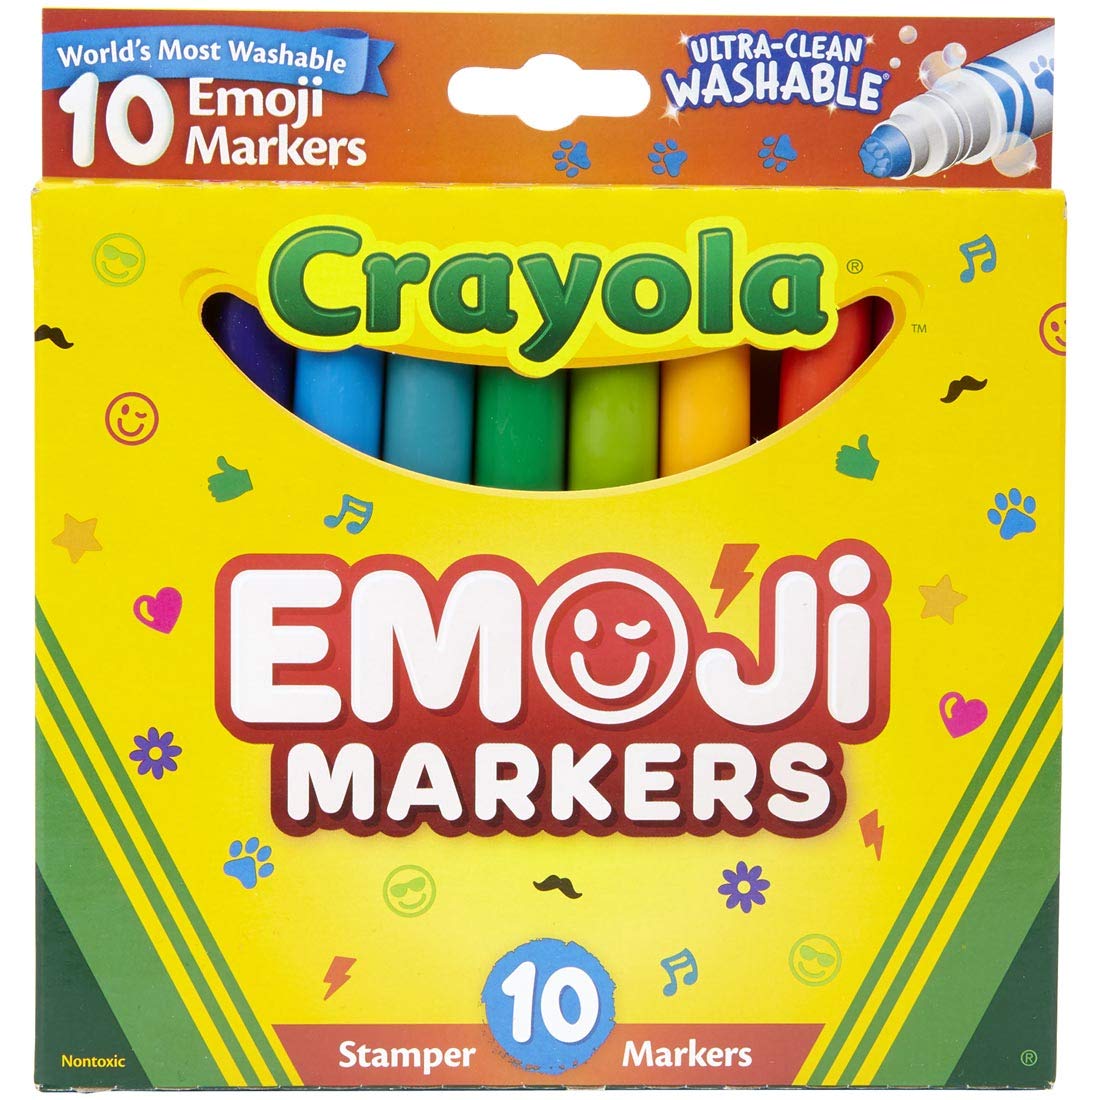 Crayola; Ultra-Clean; Stamper Markers; Art Tools; 10 ct. Markers; Bright, Bold Washable Colors; Emoticons